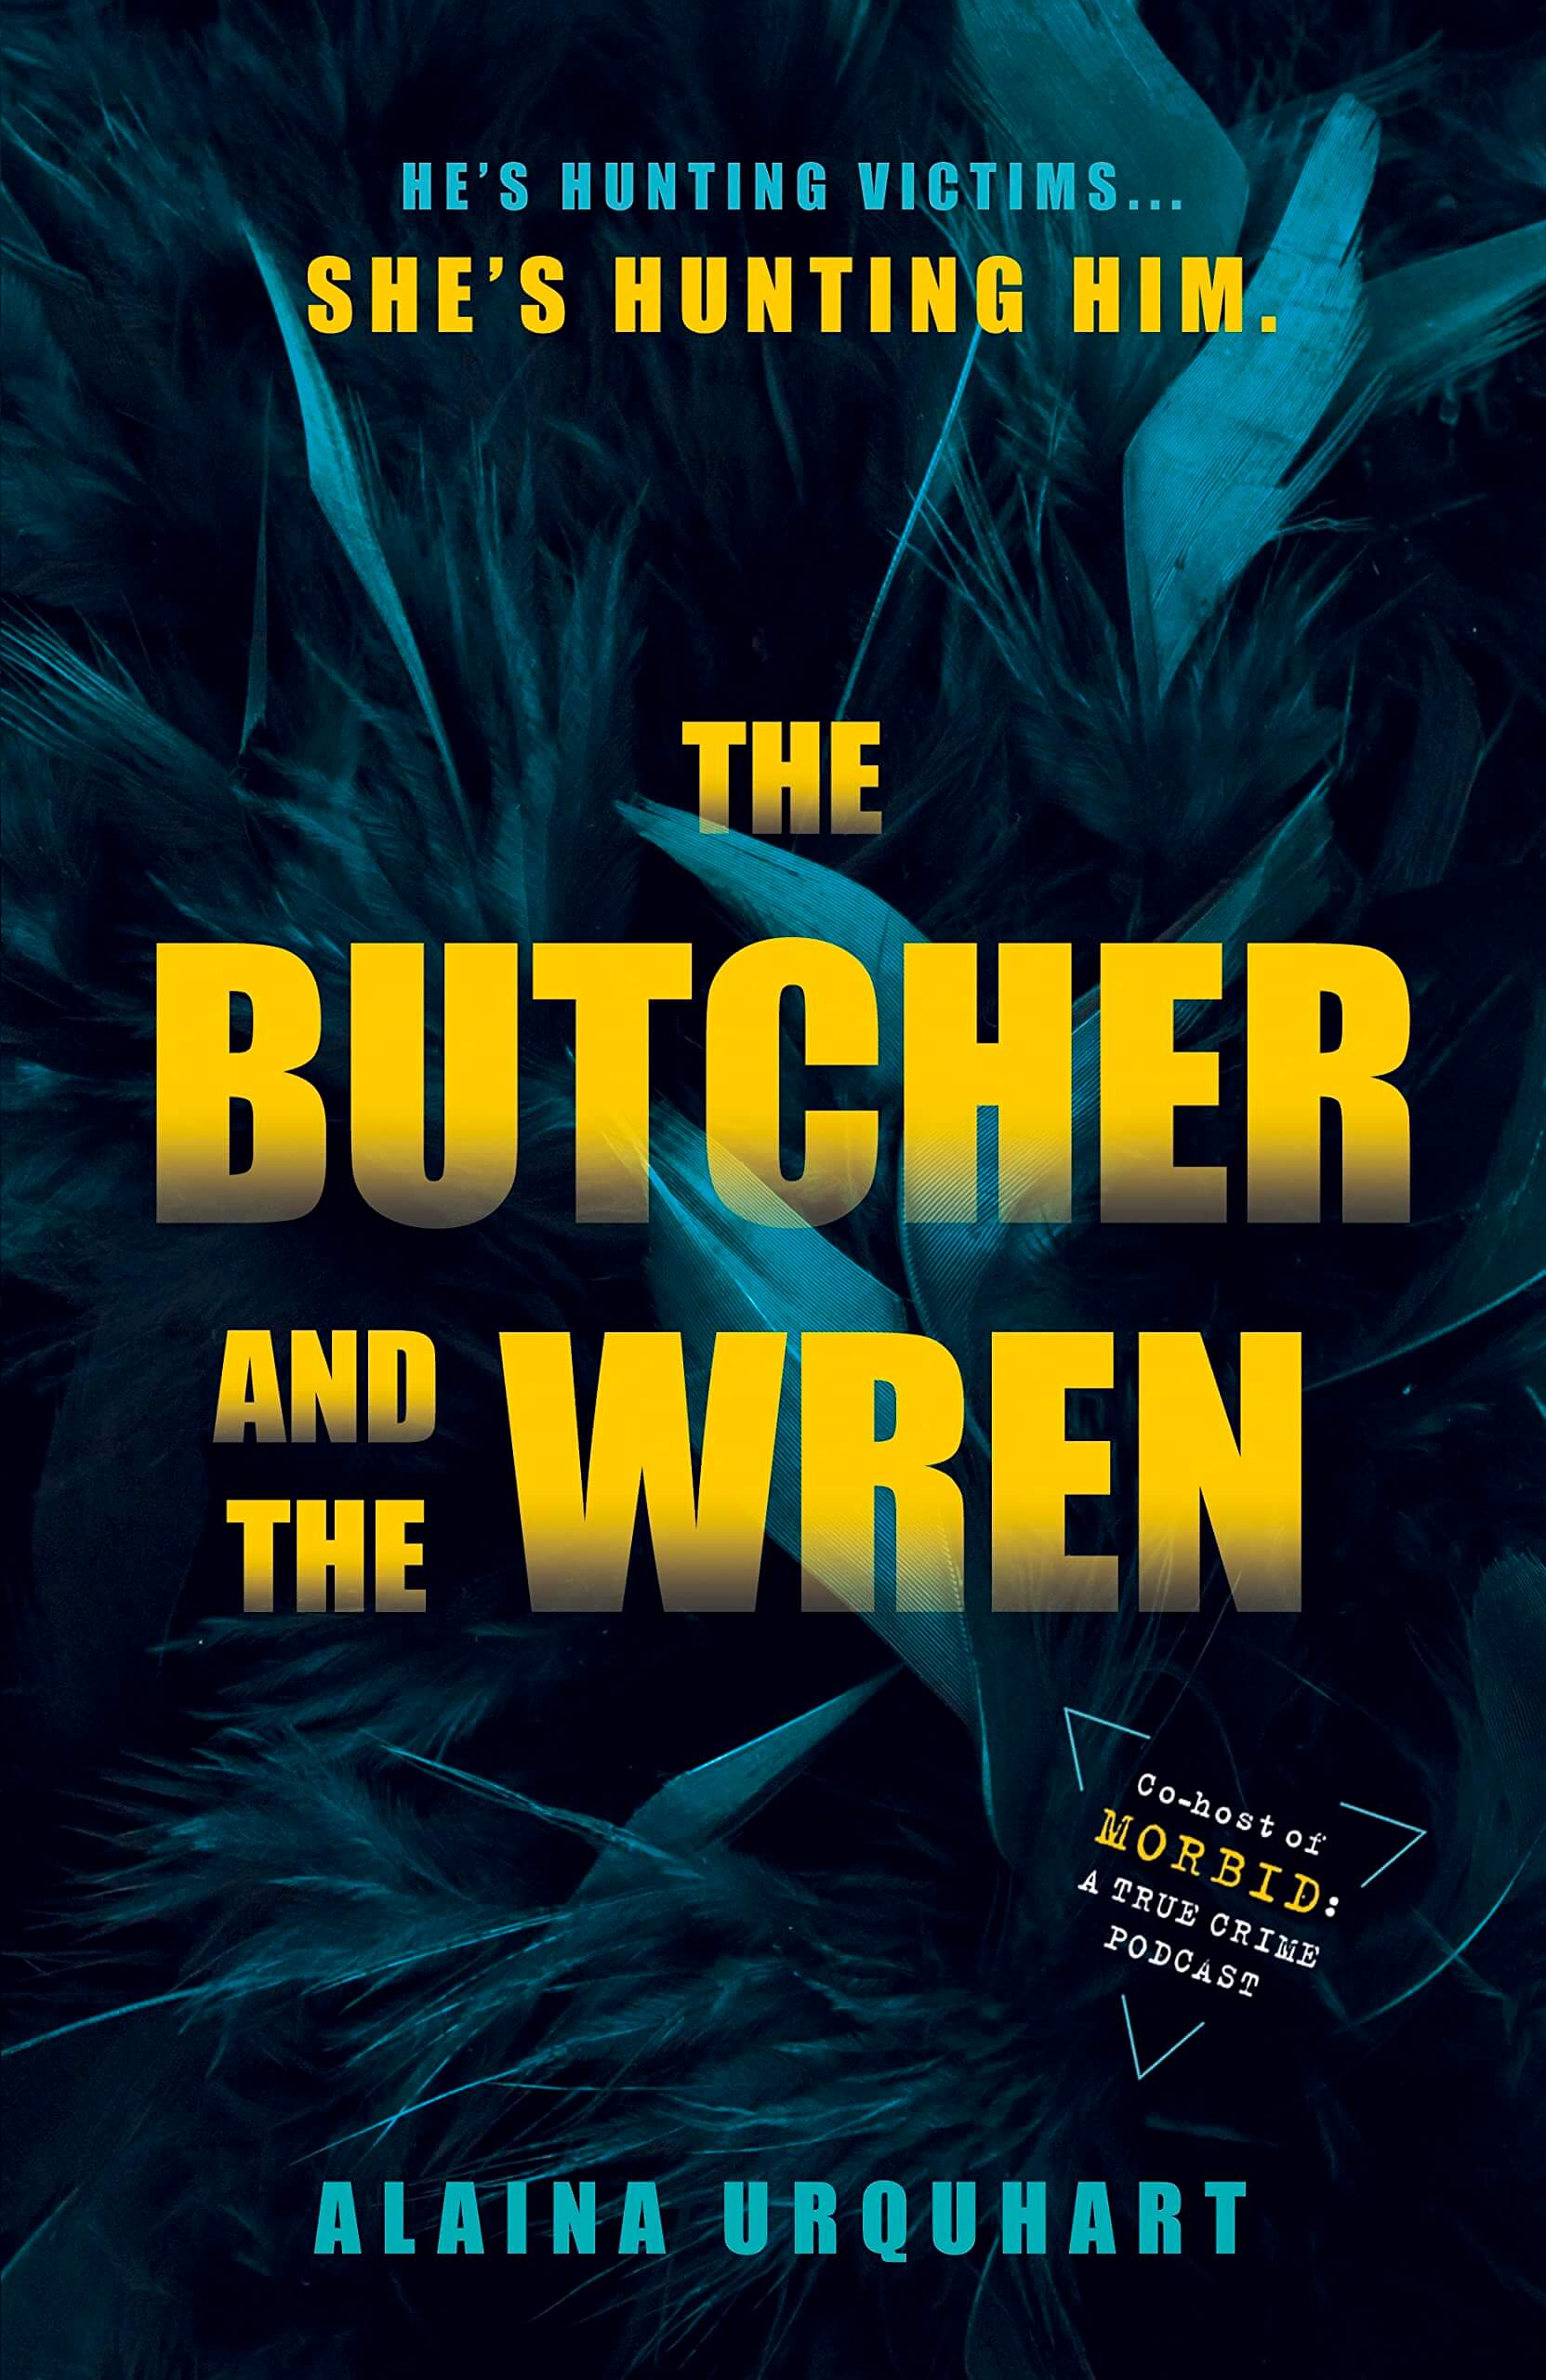 Cover of The Butcher and the Wren by Alaina Urquhart 